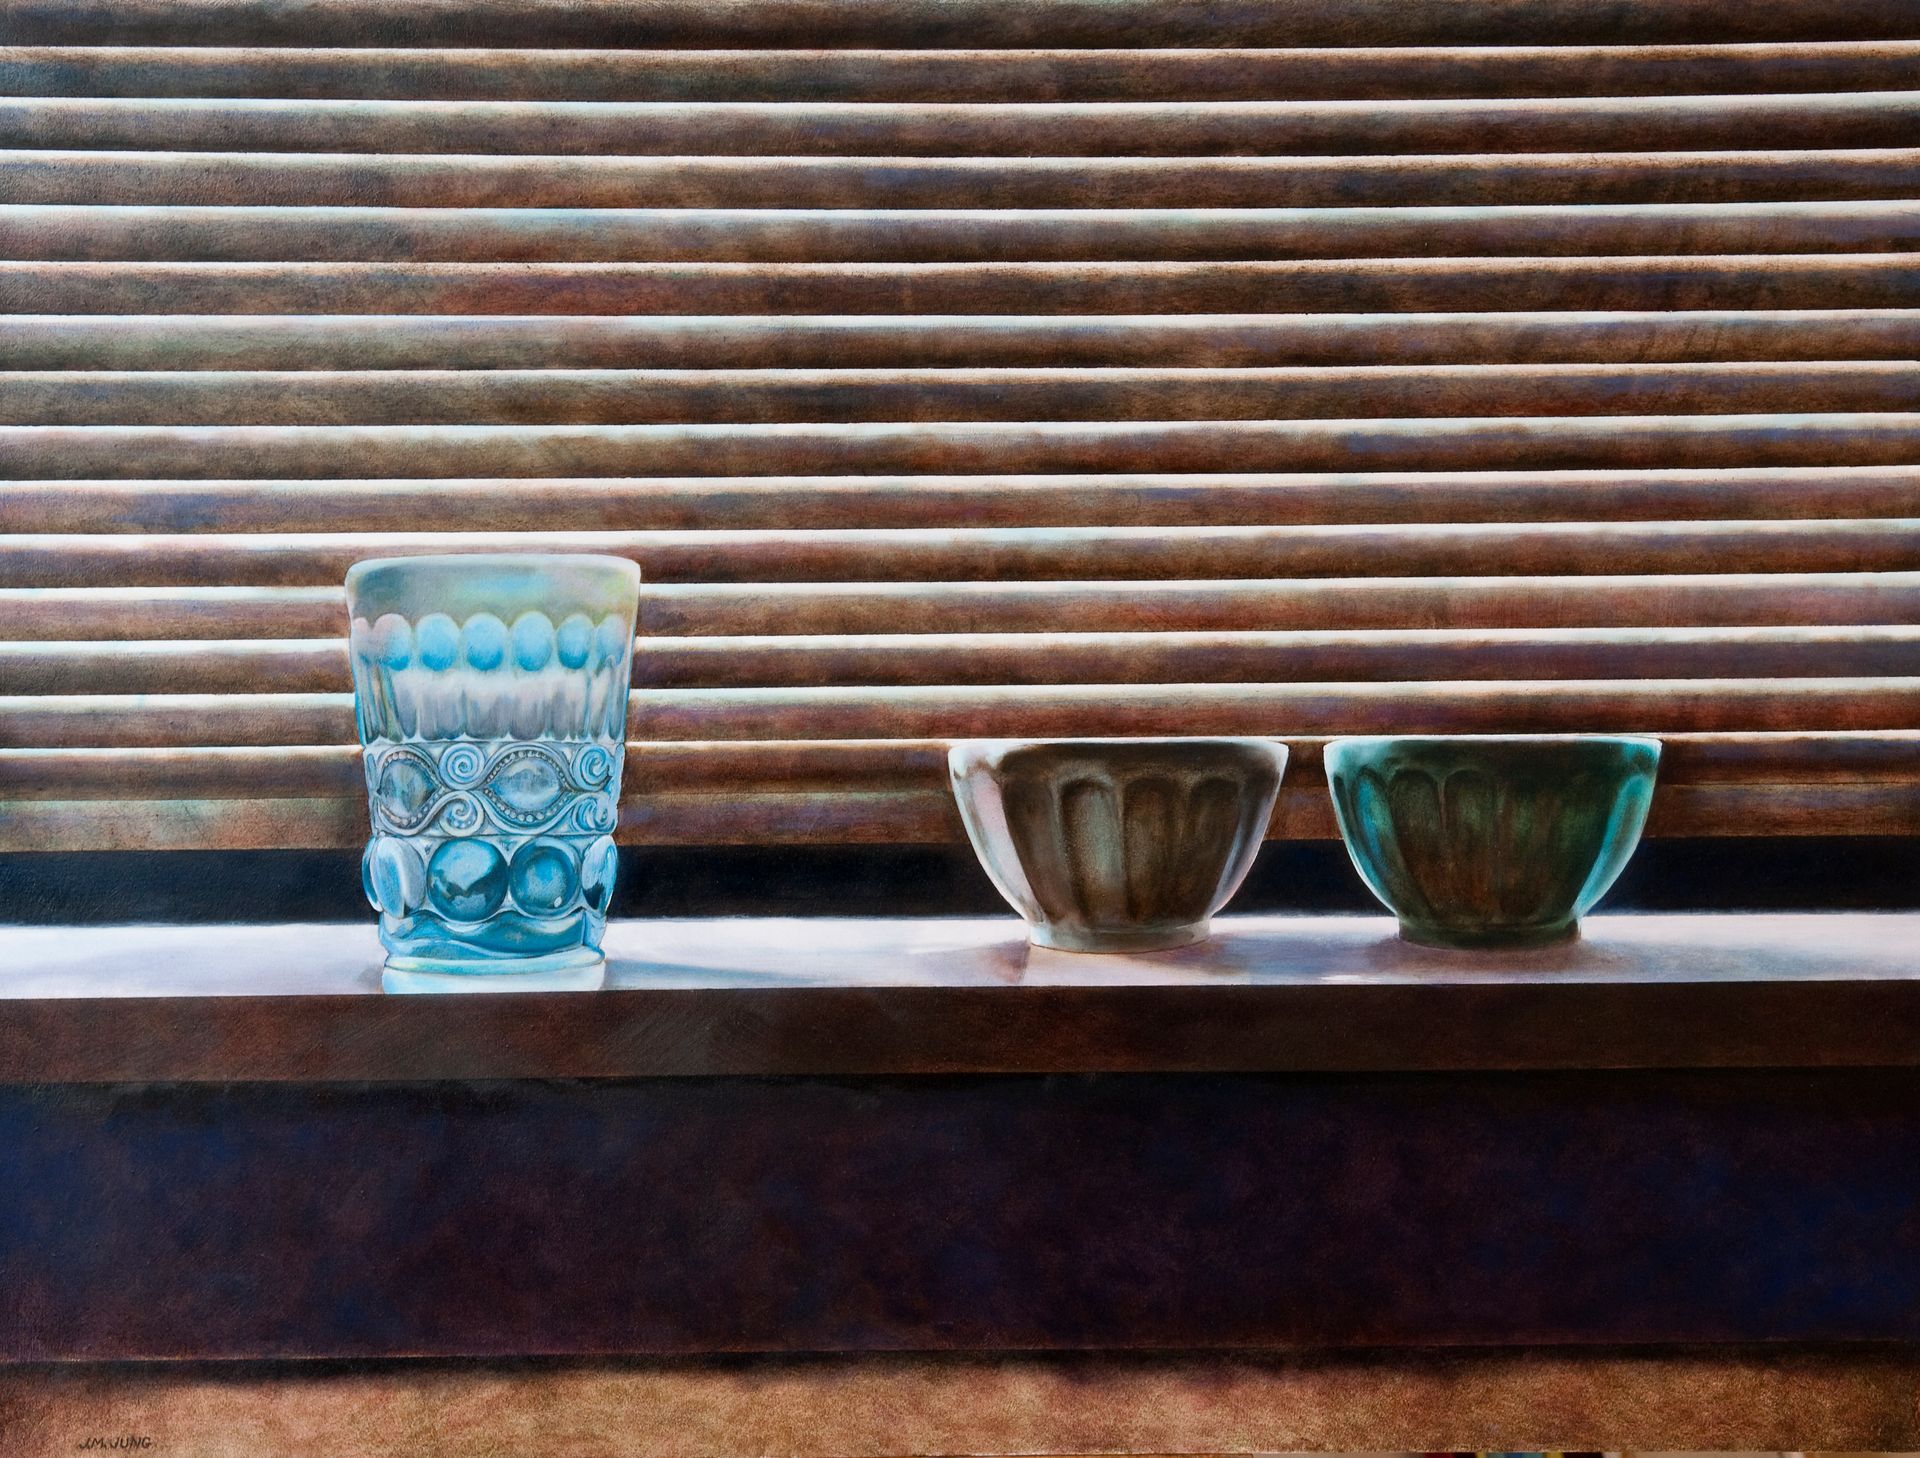 Painting of a blue cut glass and two bowls on a windowsill. The light is coming in through Venetian blinds.